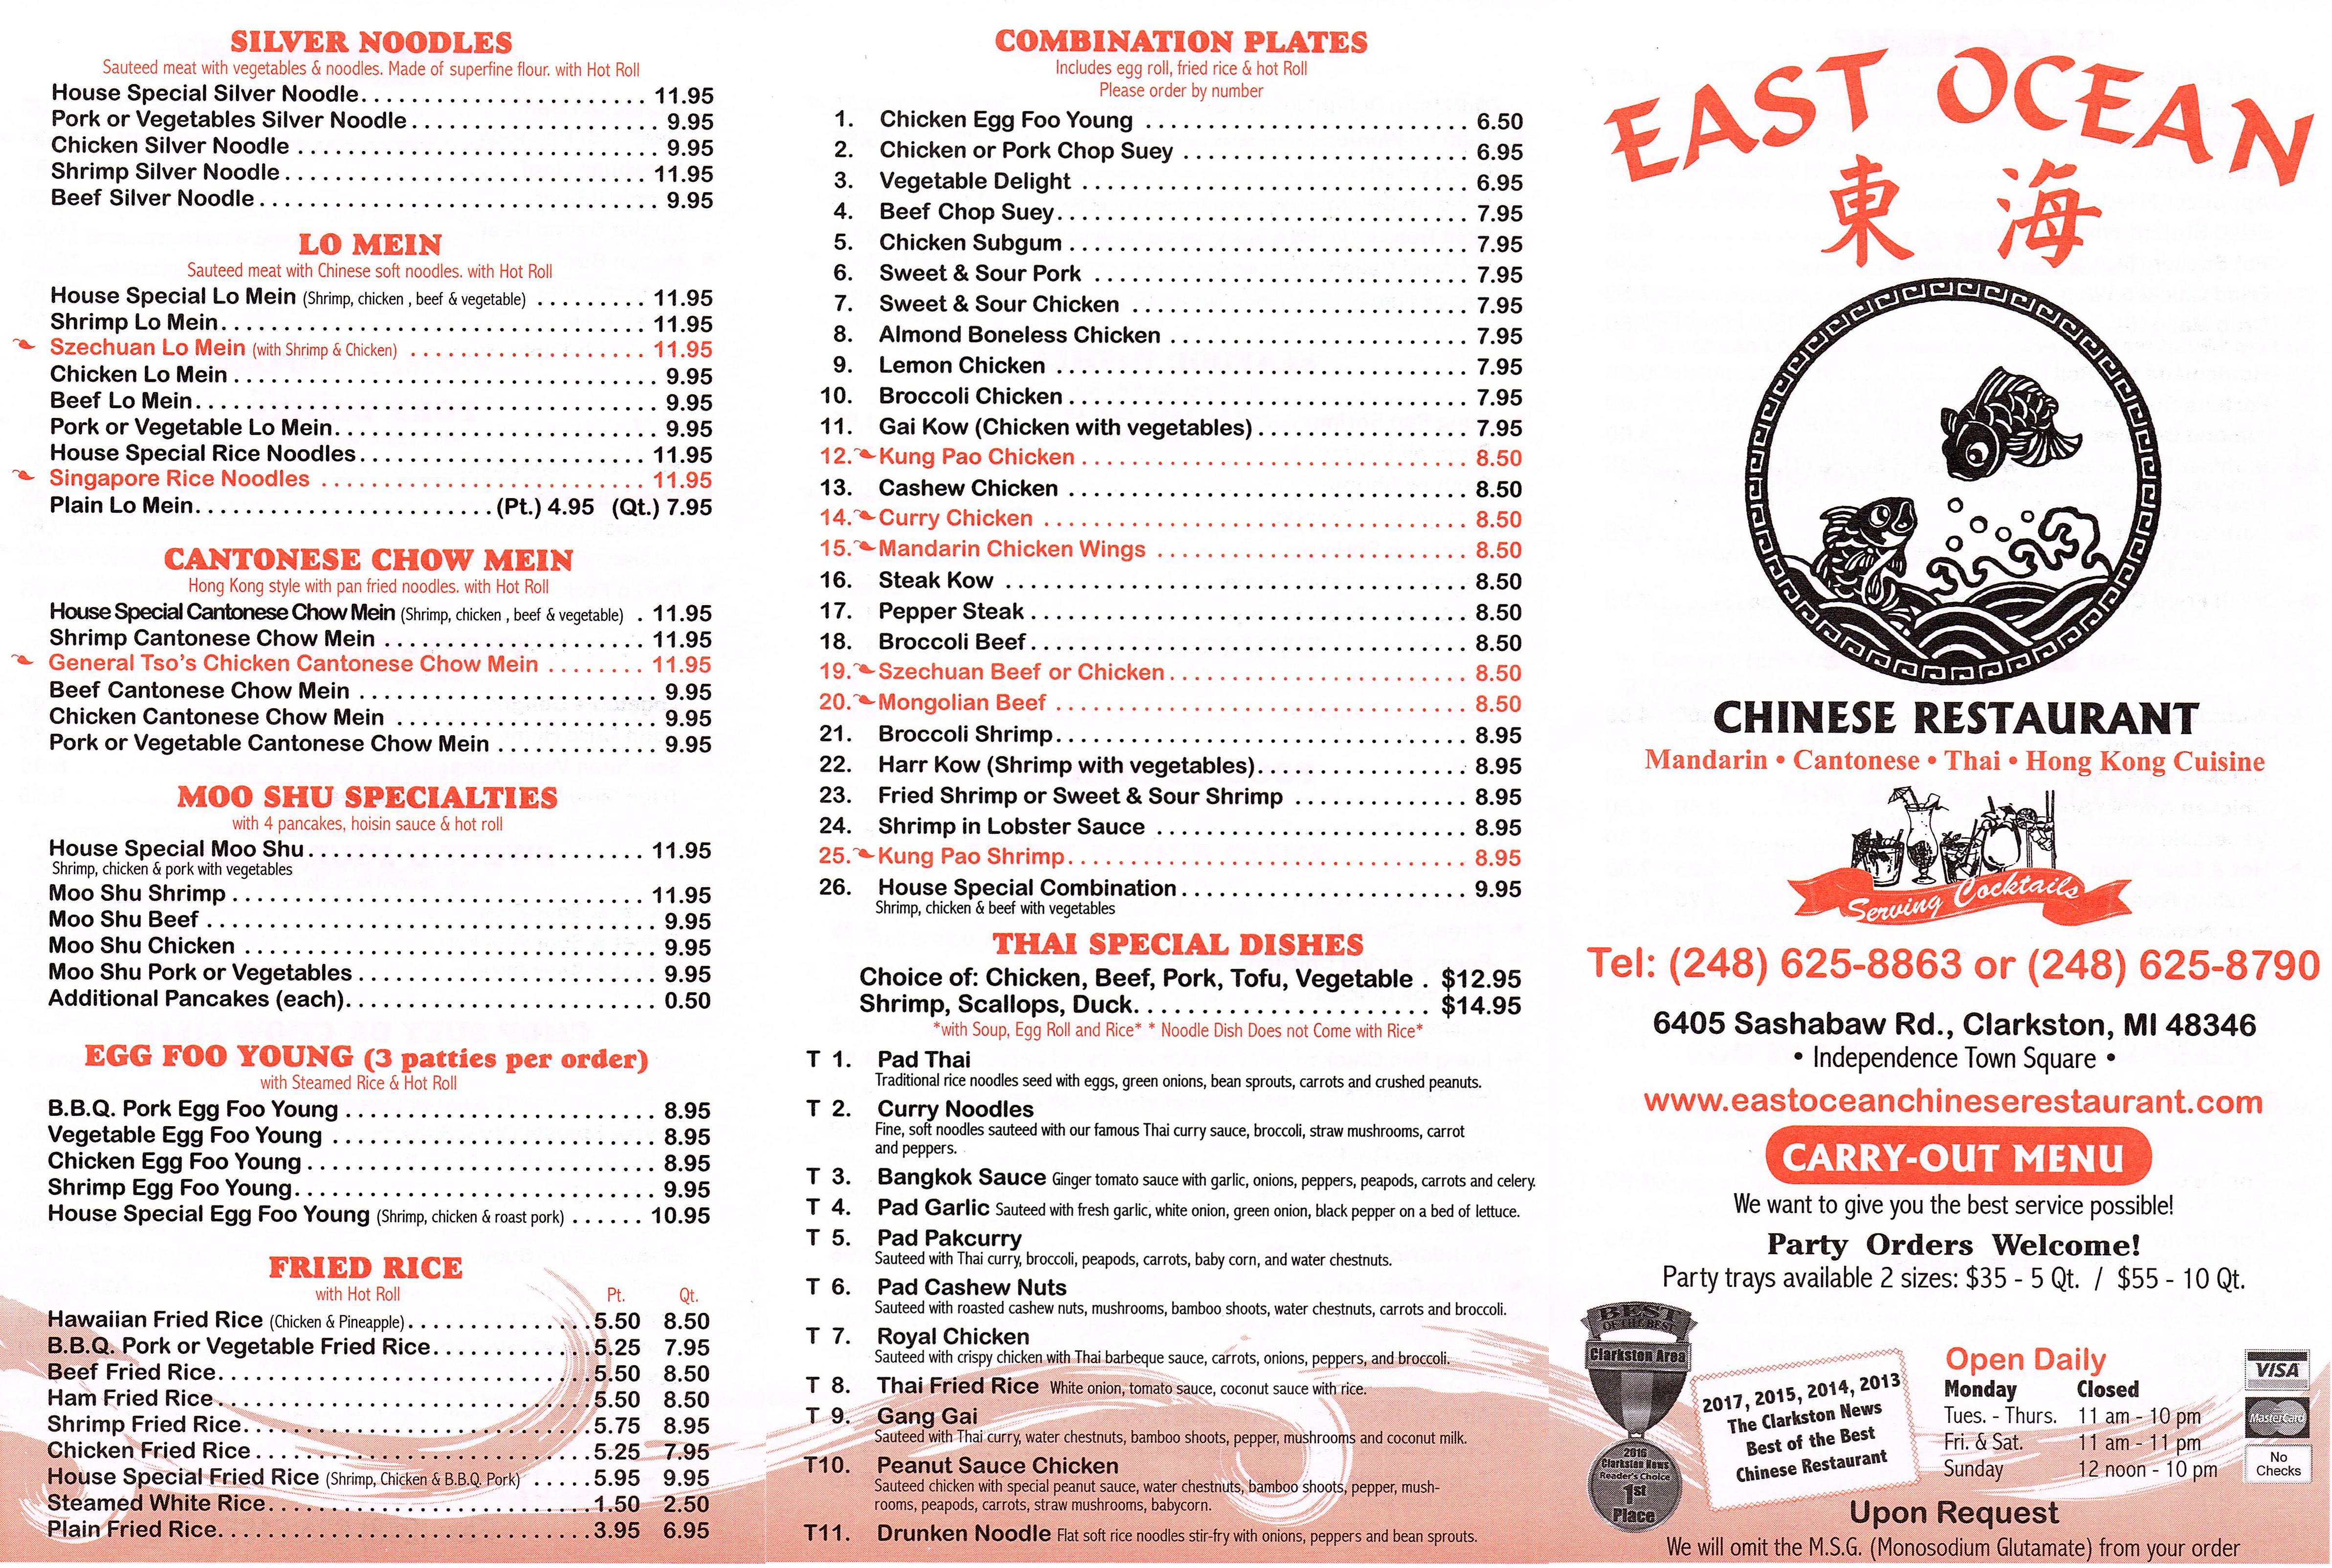 Carry Out East Ocean Chinese Restaurant in Clarkston, MI